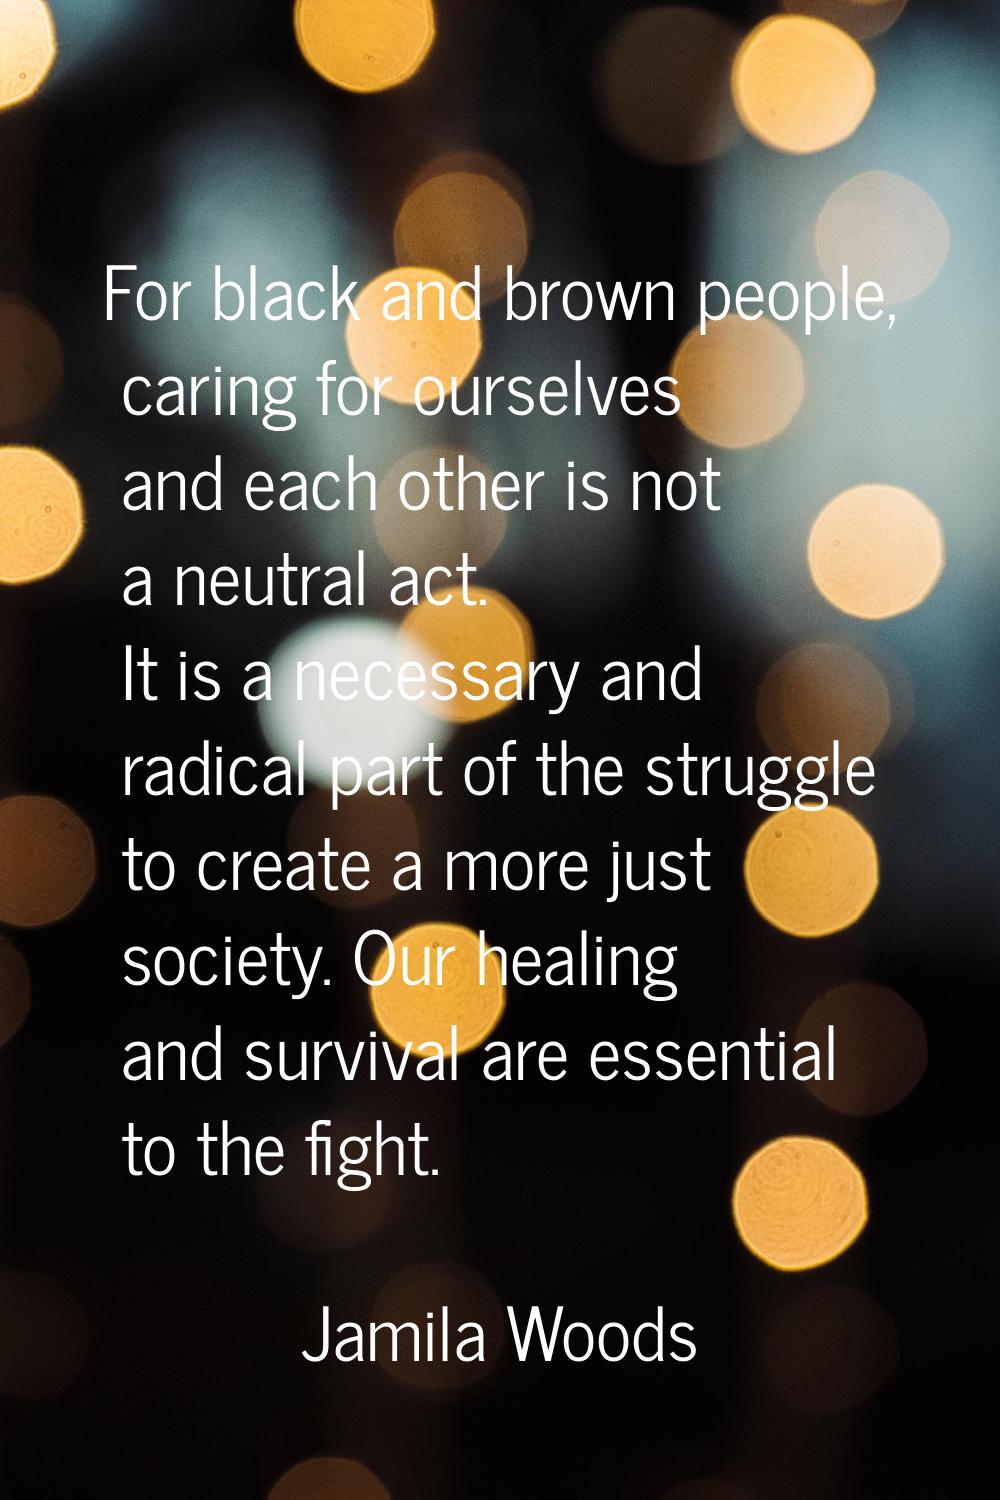 For black and brown people, caring for ourselves and each other is not a neutral act. It is a neces